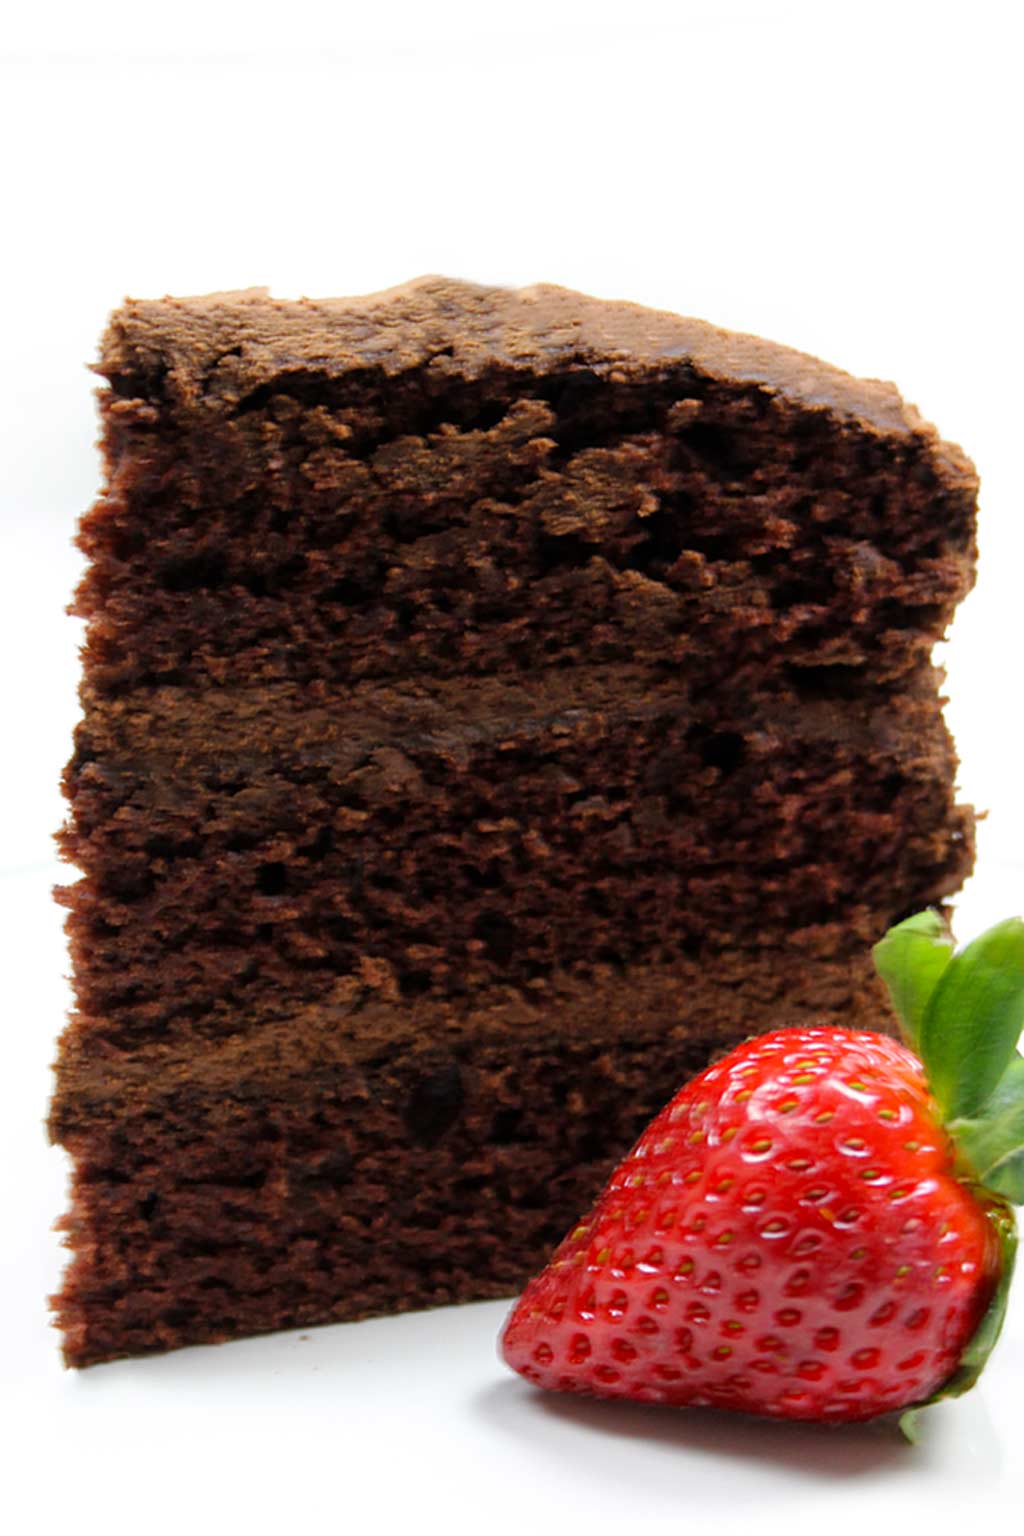 a slice of chocolate cake with a strawberry beside it